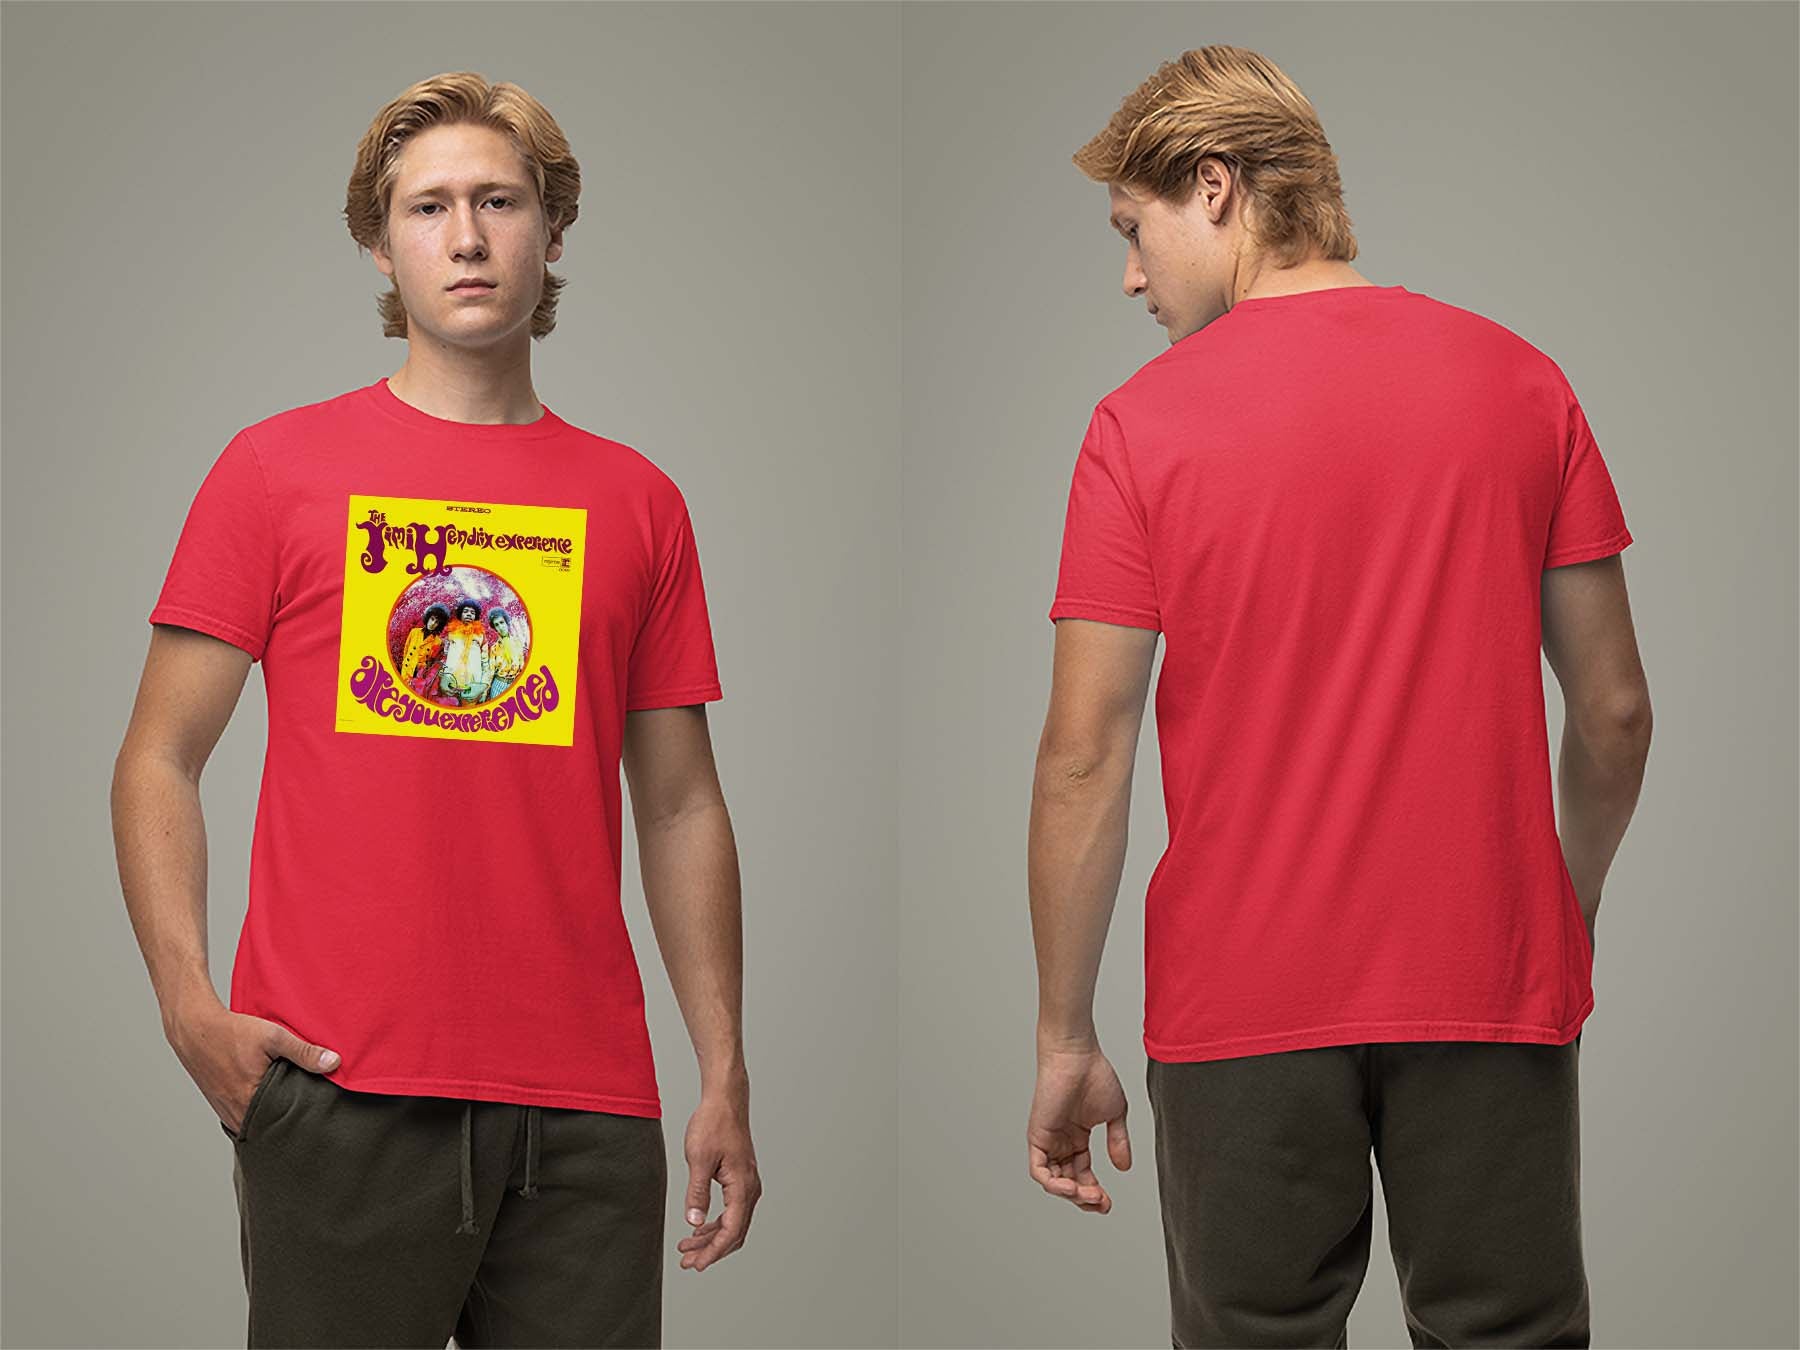 Are You Experienced T-Shirt Small Red